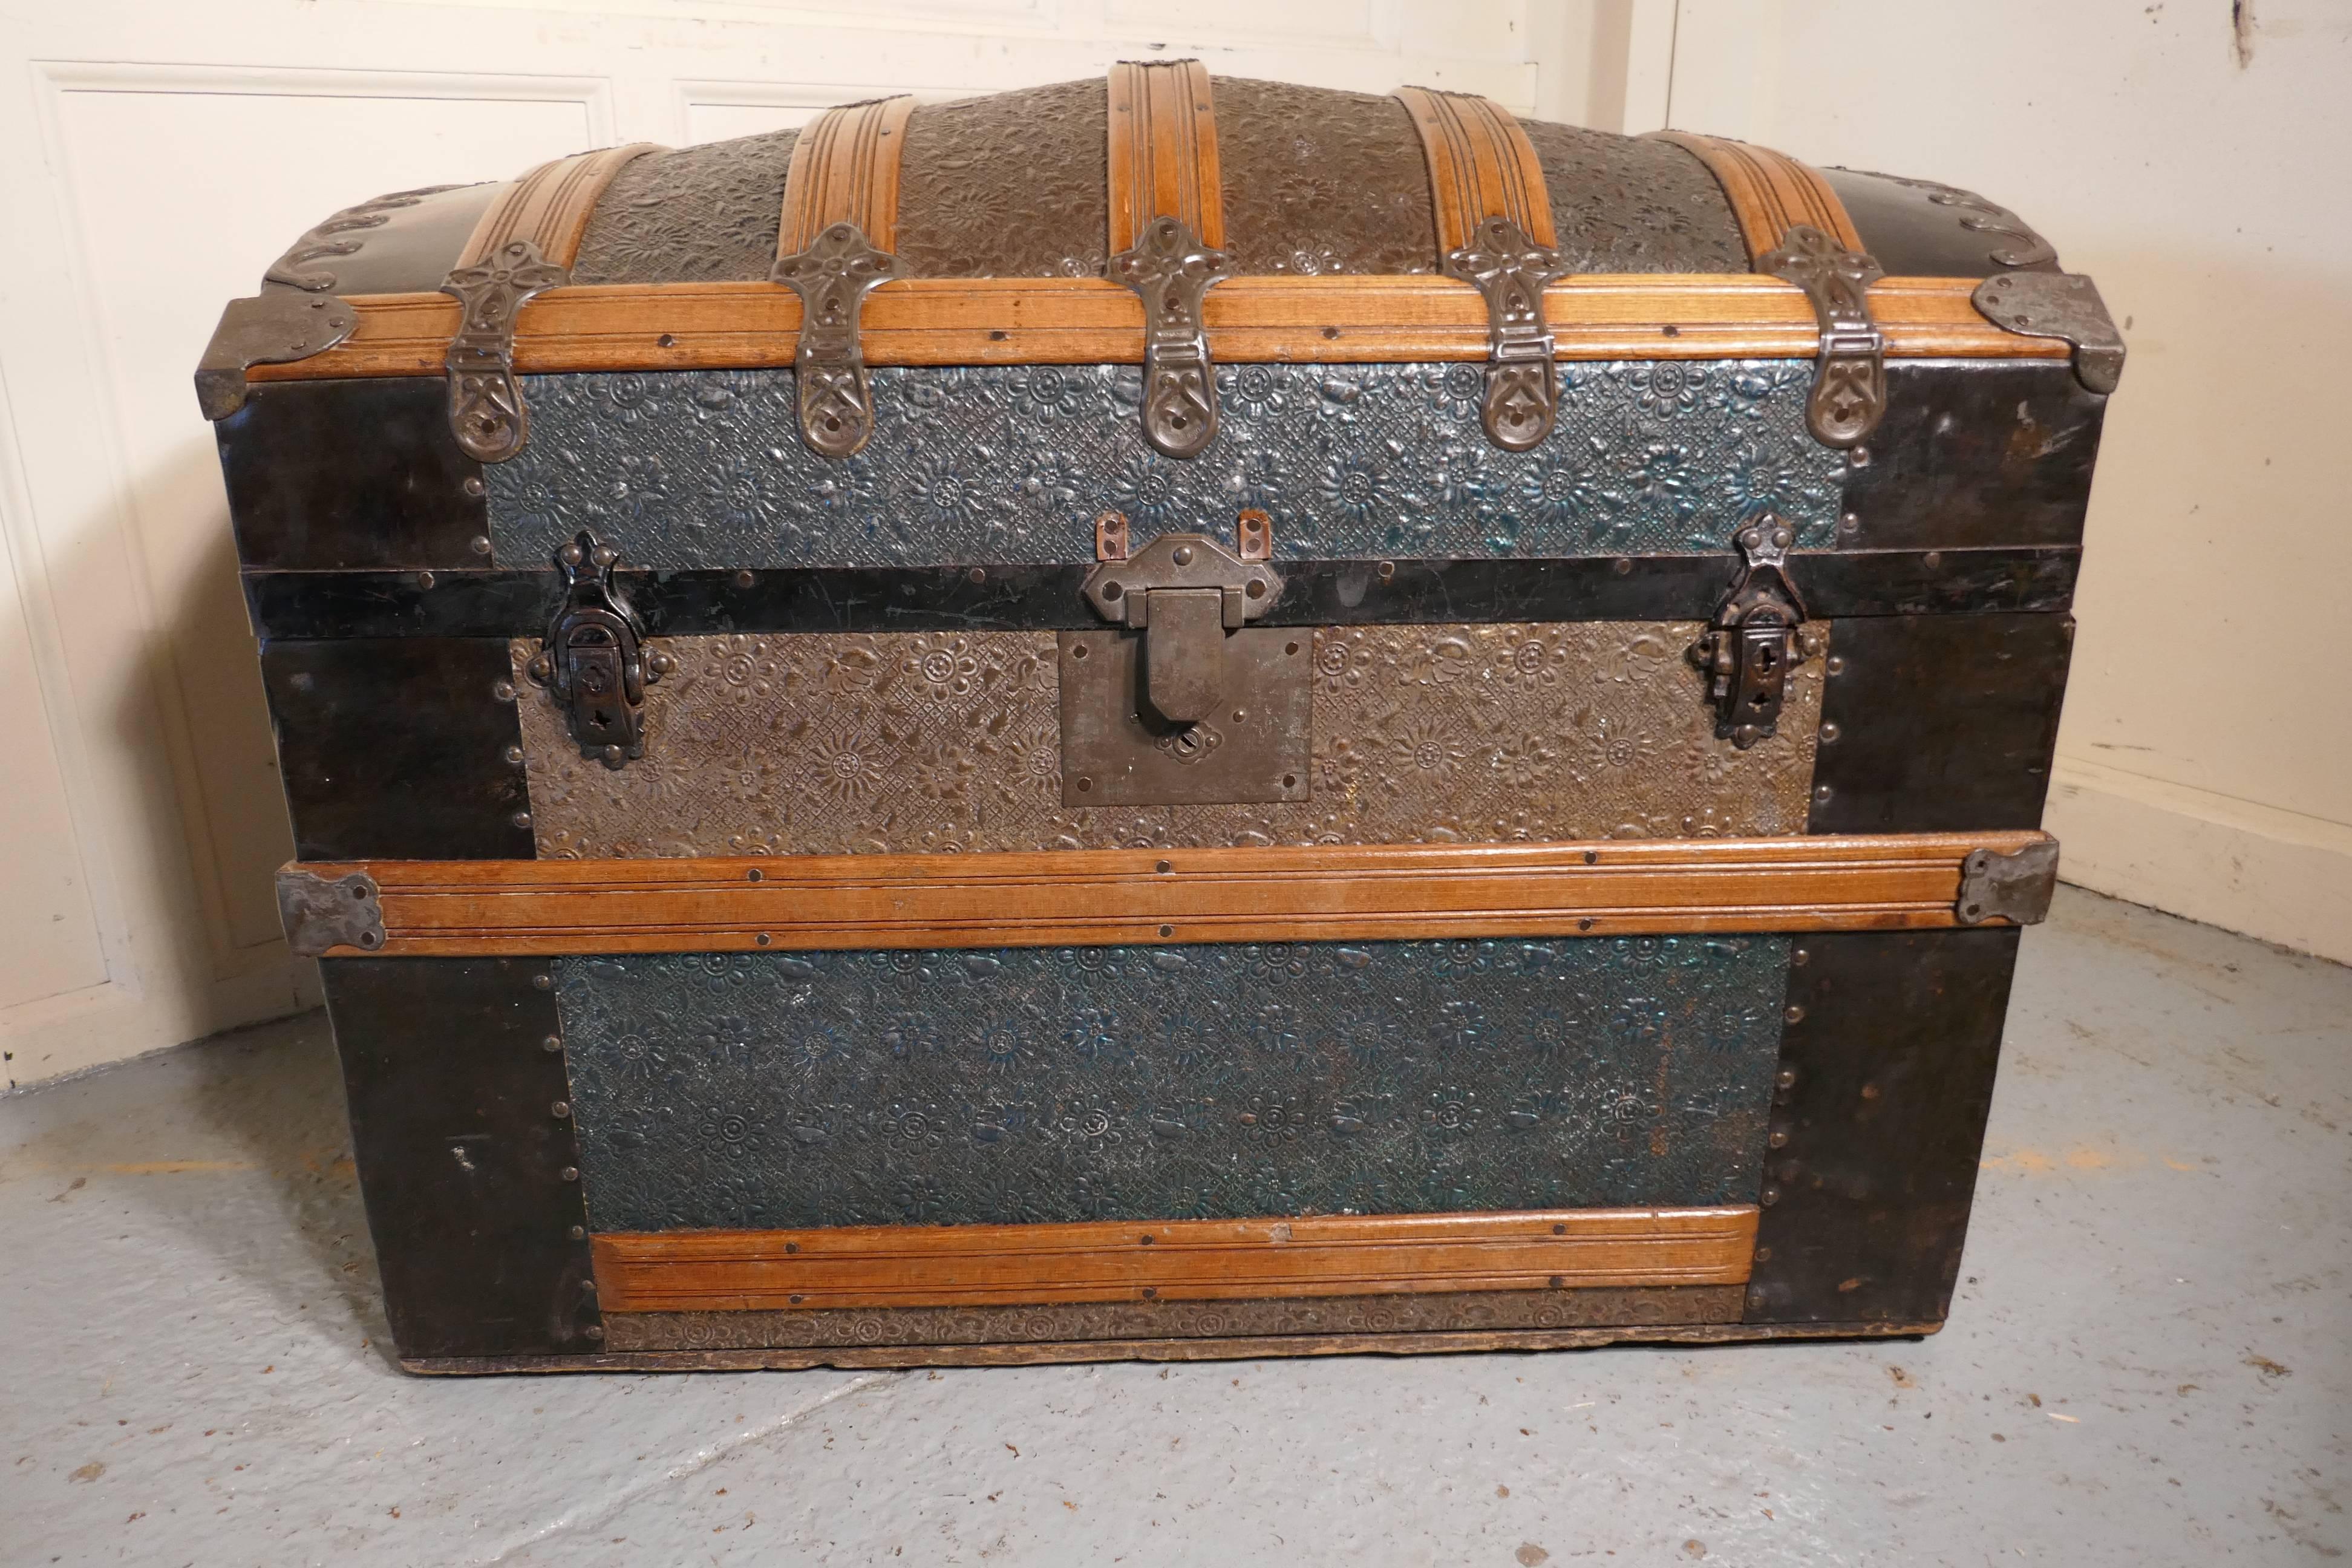 Very decorative Spanish dome top trunk

The trunk has a pine carcass, and it is covered in very decorative embossed painted metal, it has wooden banding with decorative metal work around all the edges. Some of the metal work has been simulated to